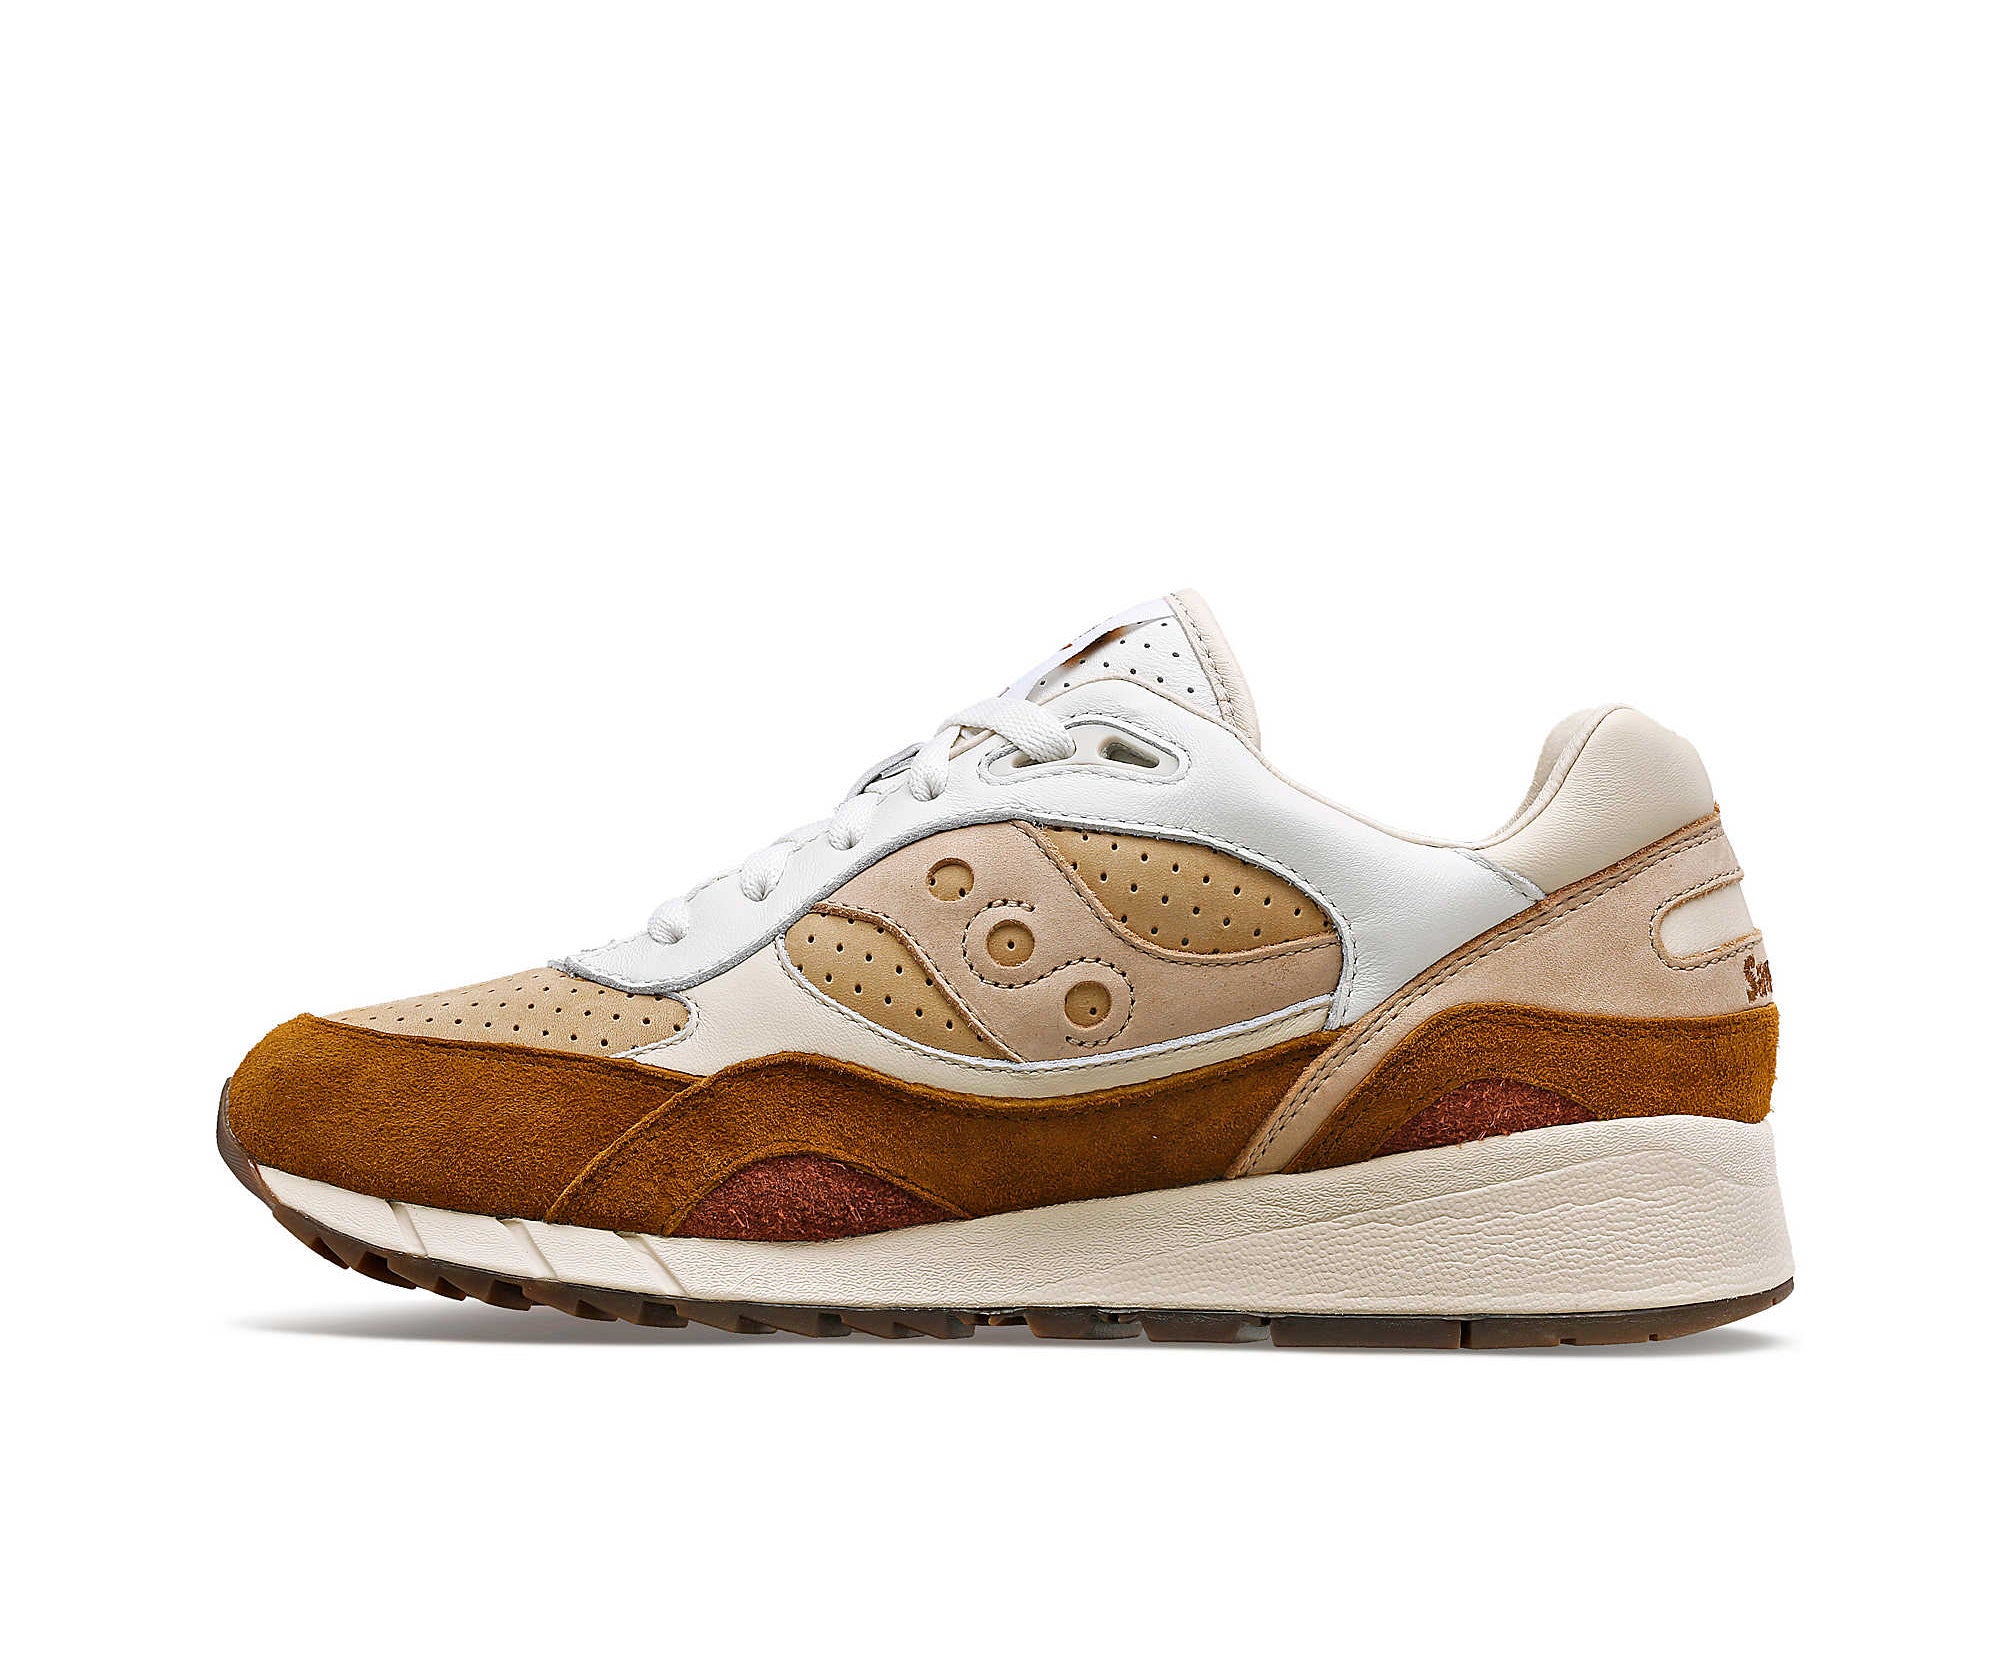 A suede low-cut Saucony sneaker in various shades of light brown.